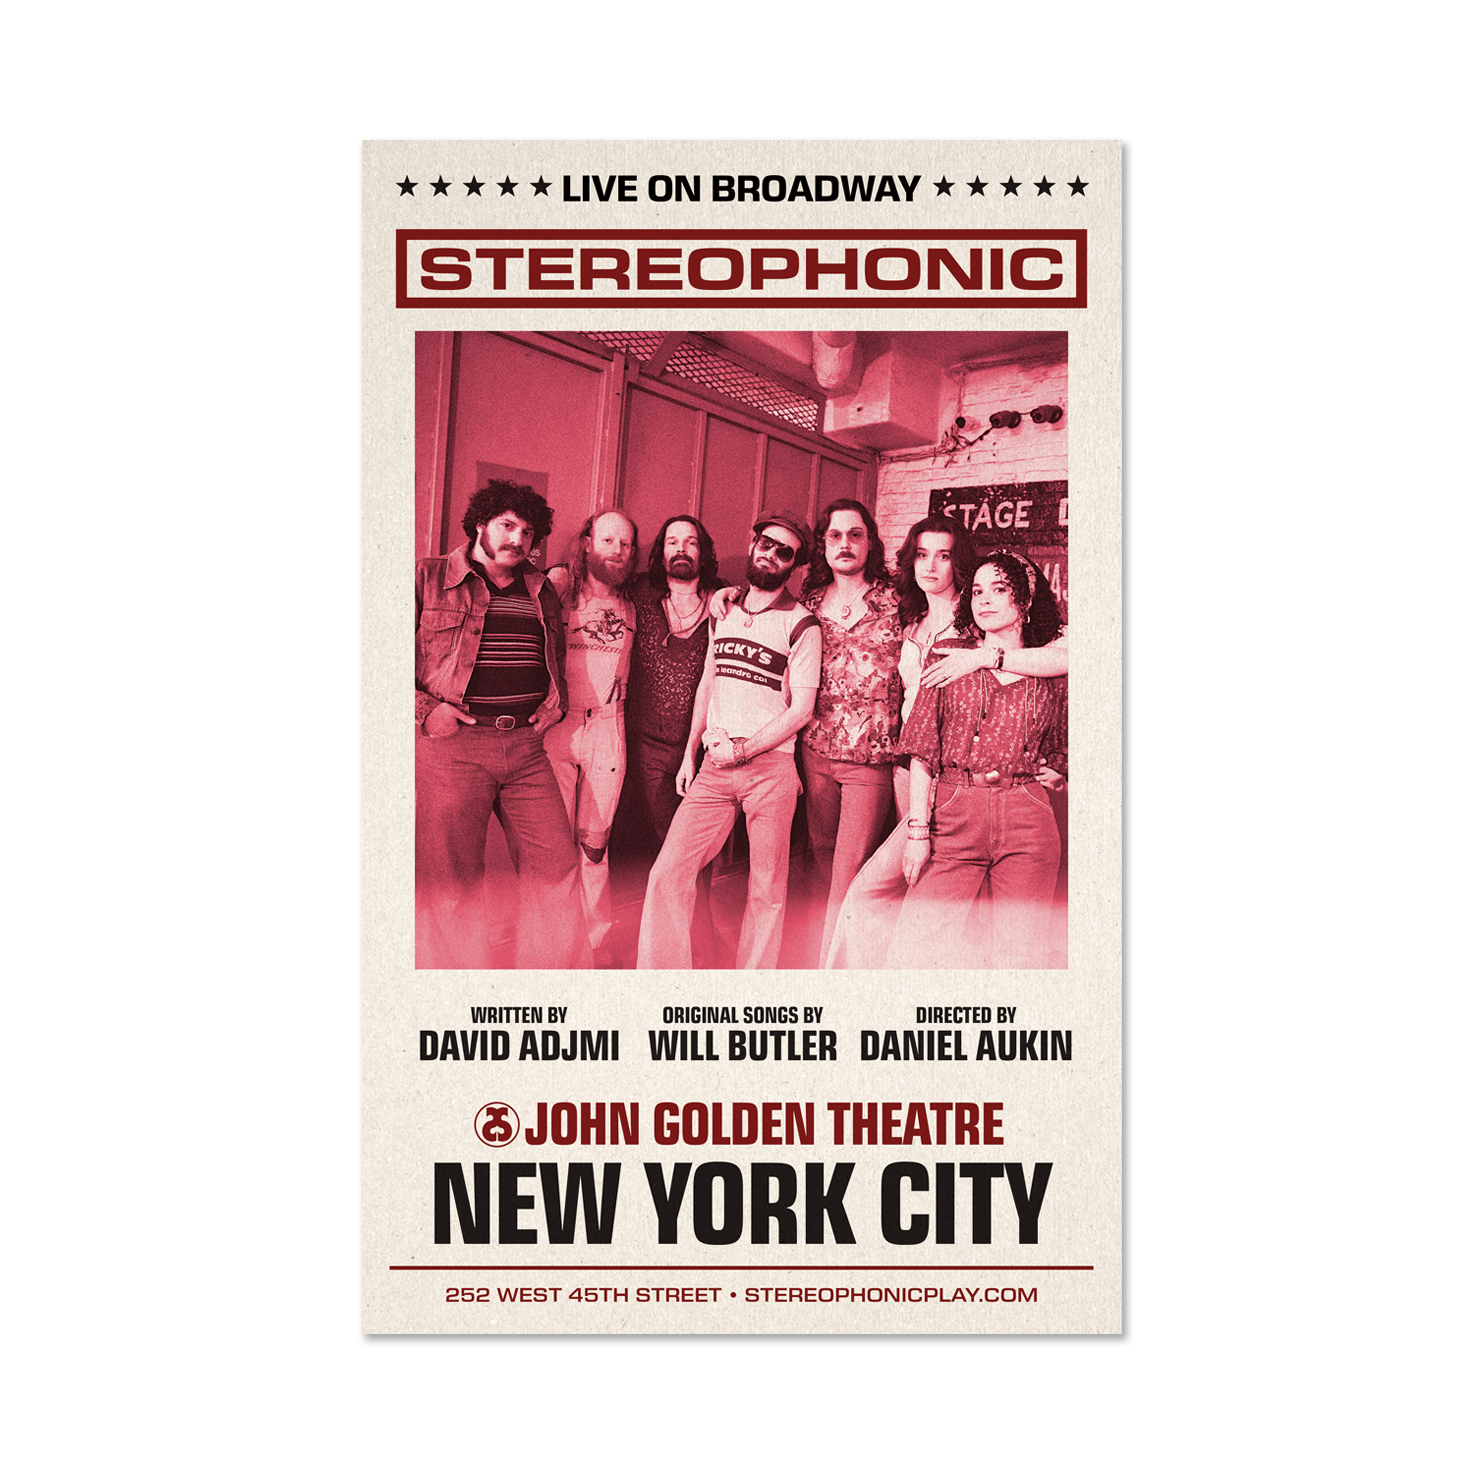 STEREOPHONIC Live On Broadway Windowcard Image